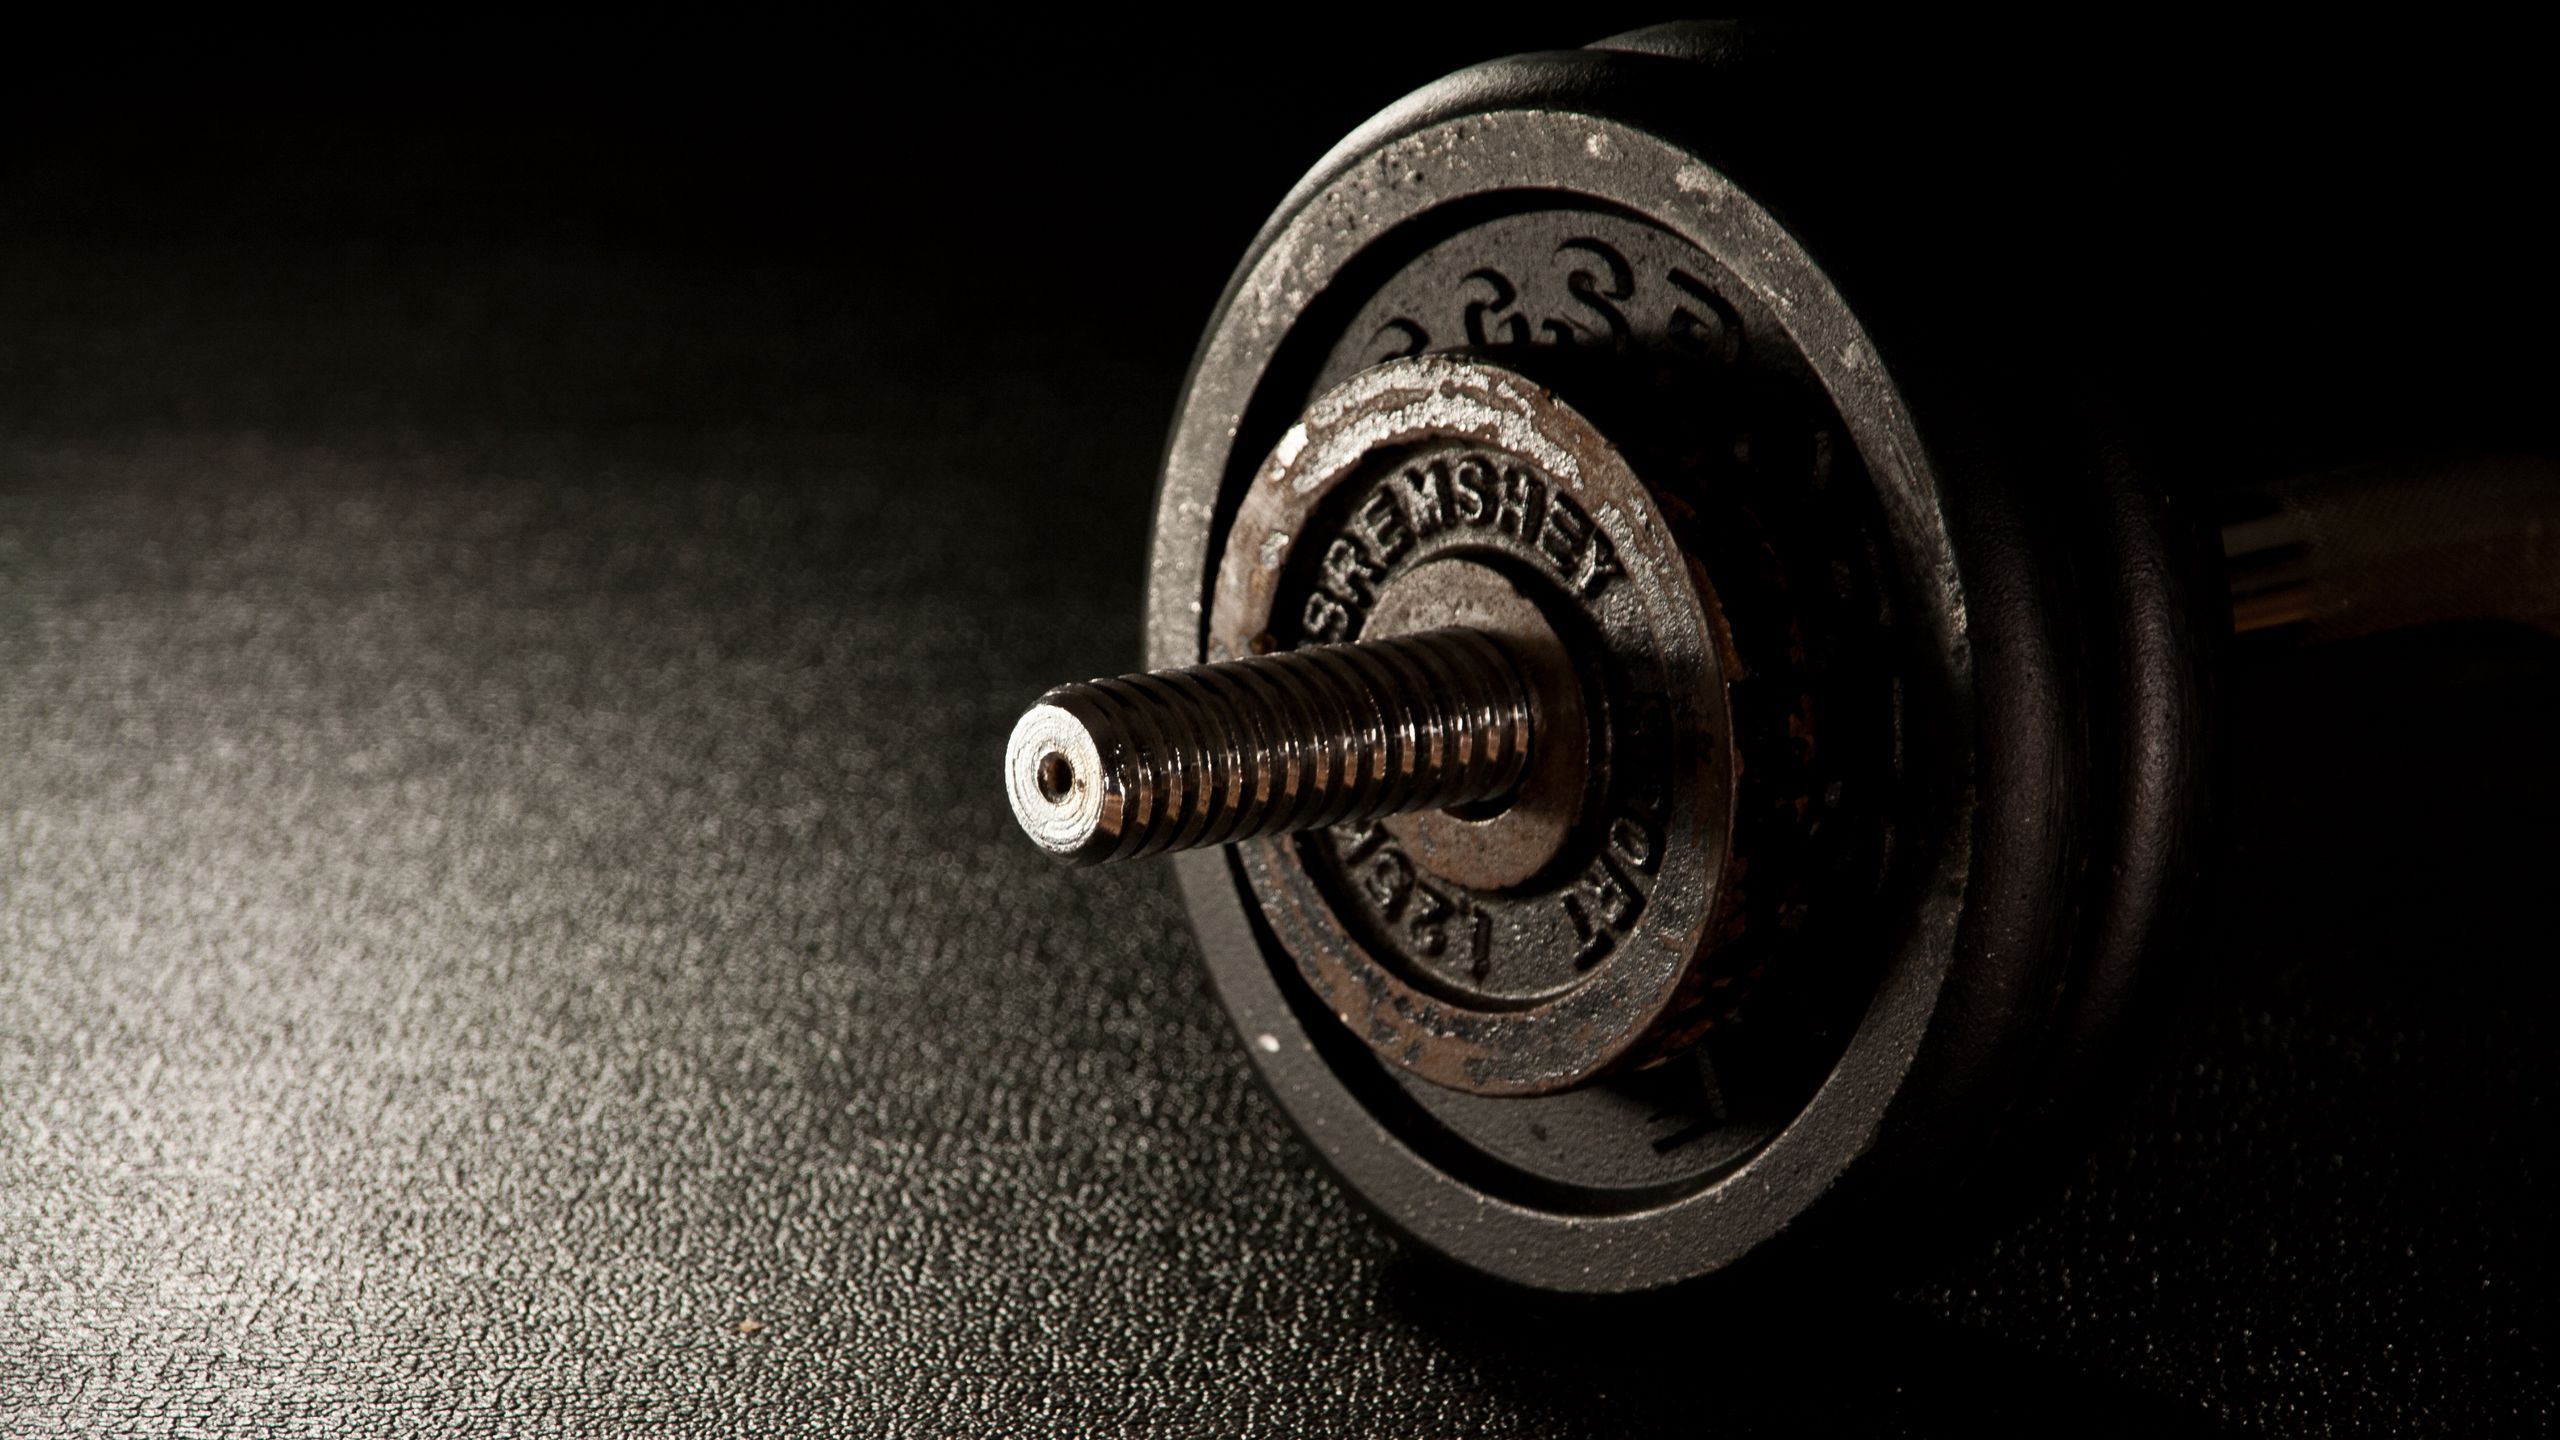 Download wallpaper 2560x1440 dumbbells, fitness, gym widescreen 16:9 HD background